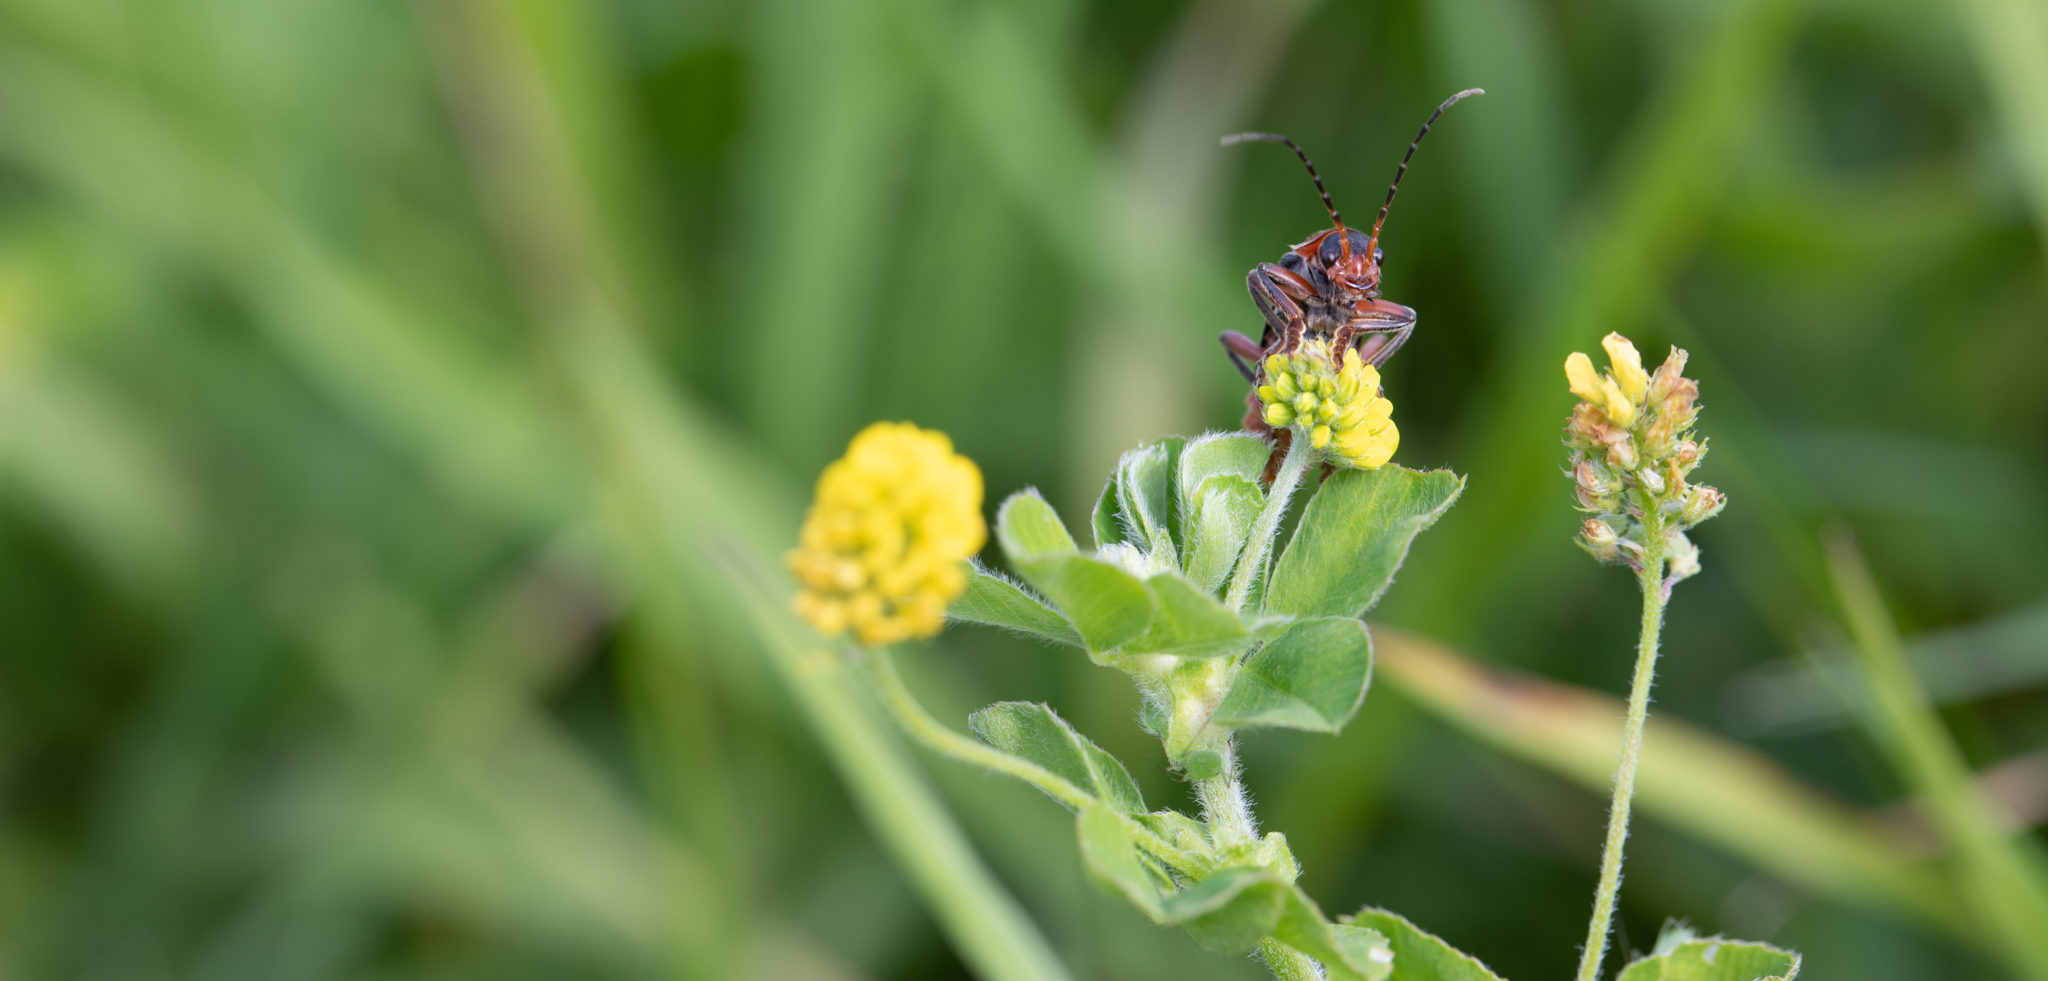 Red and black beetle on small yellow flower.